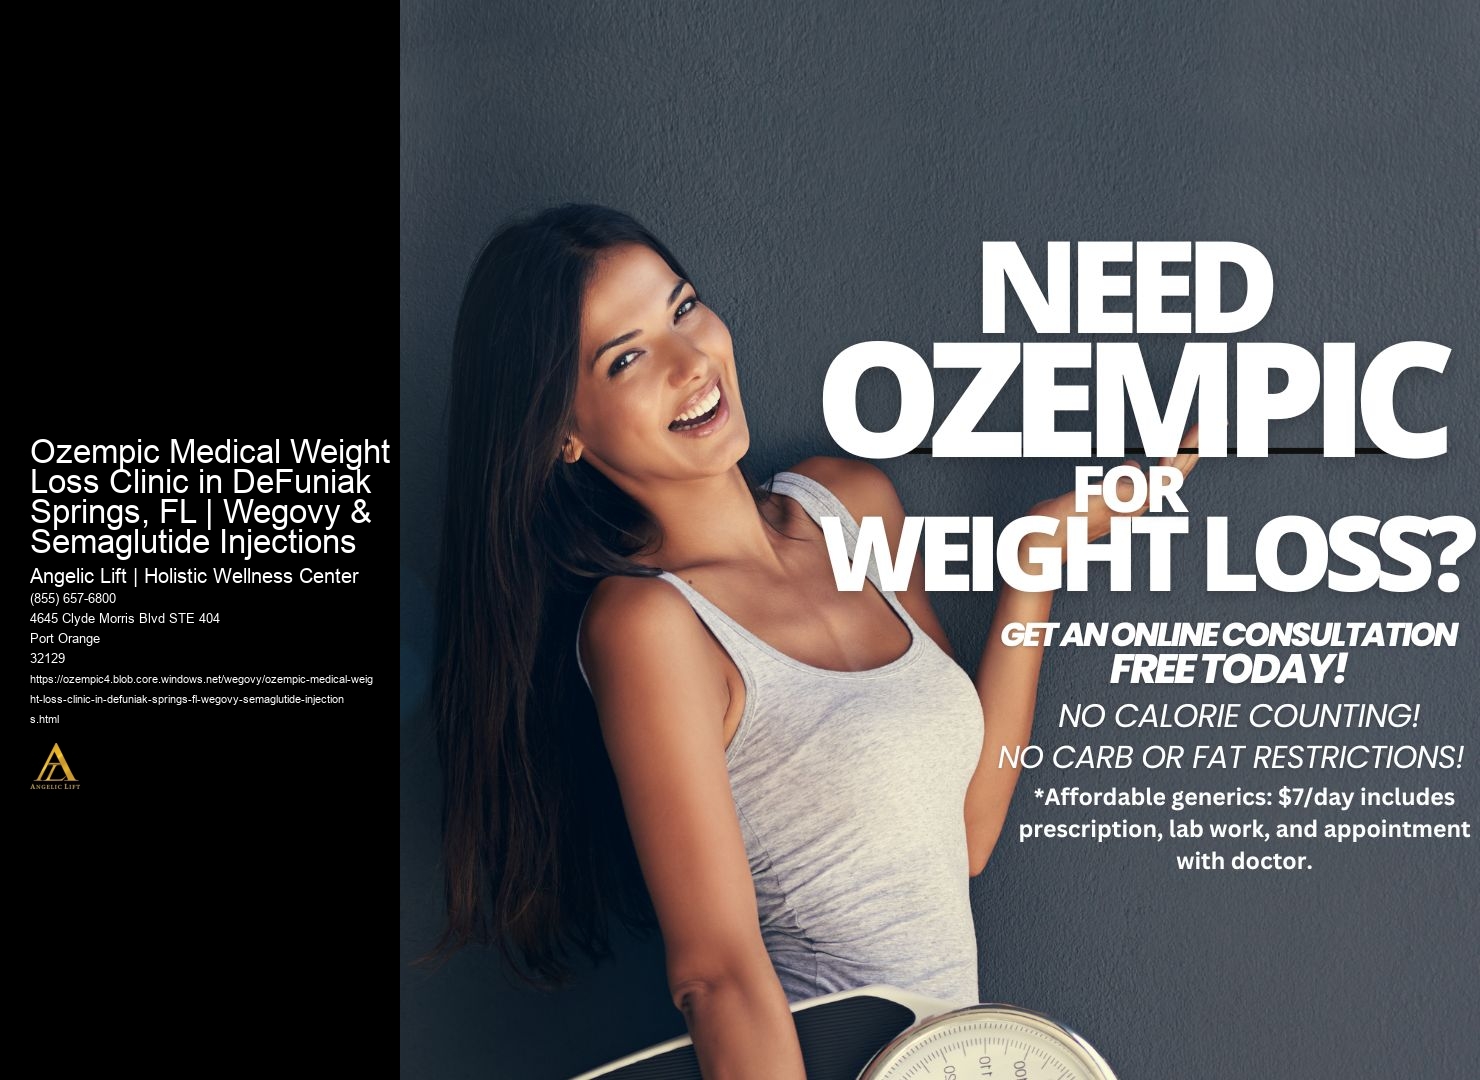 Ozempic Medical Weight Loss Clinic in DeFuniak Springs, FL | Wegovy & Semaglutide Injections